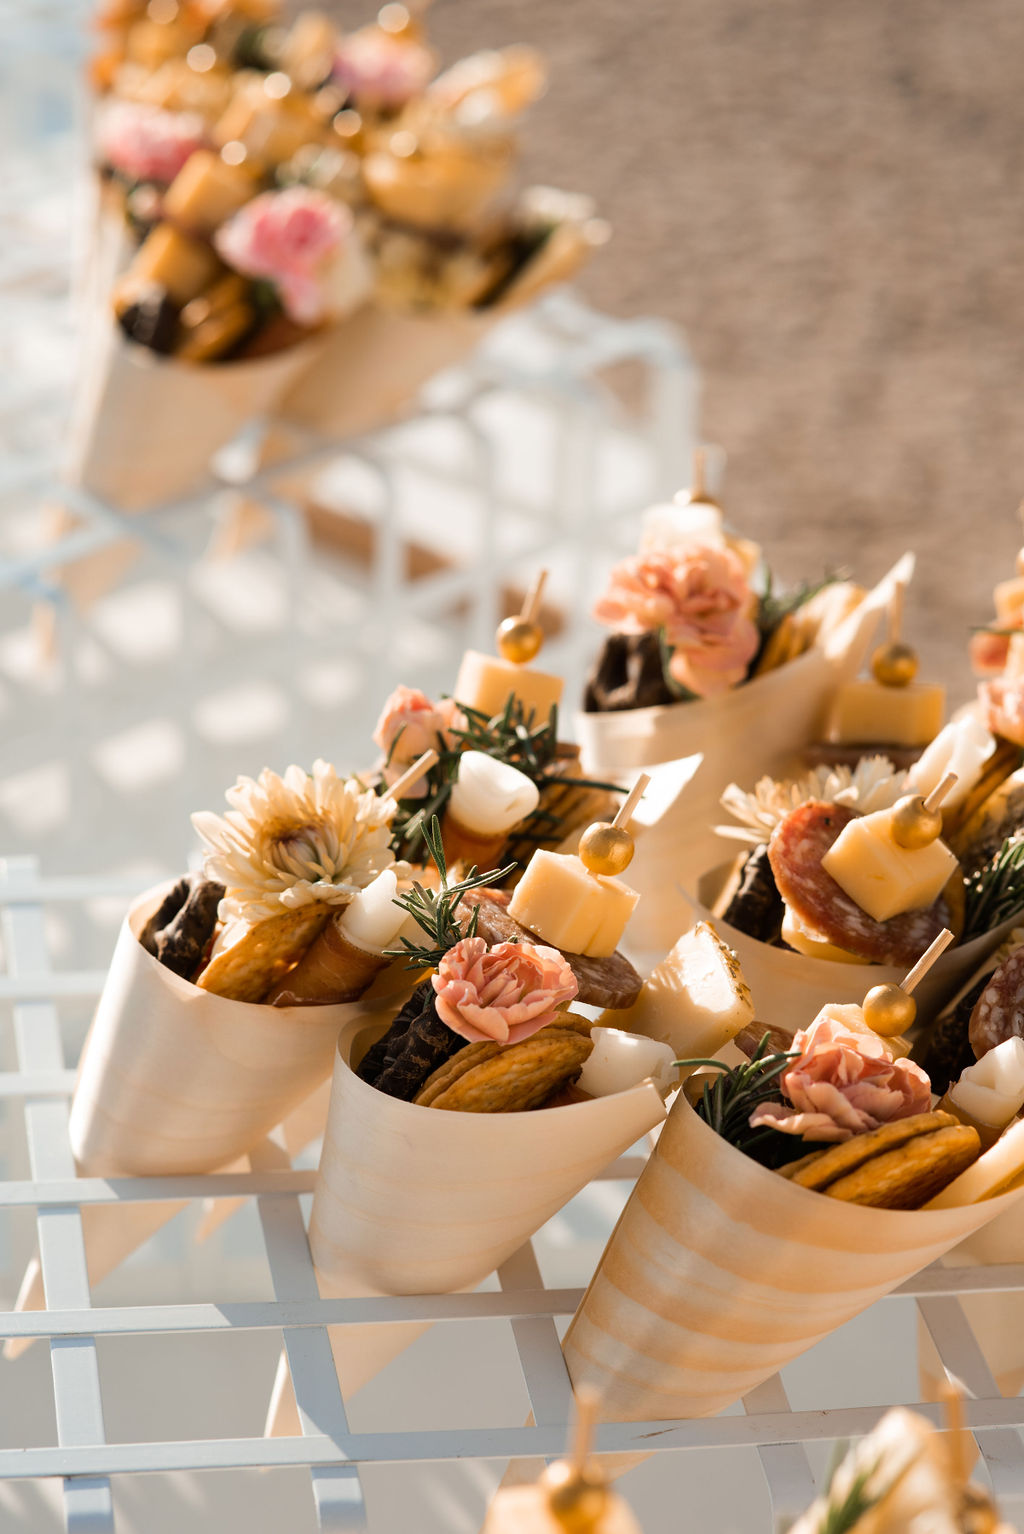 Elegant paper cones filled with assorted gourmet snacks including cheeses, cured meats, and flowers, displayed on a metal grid.